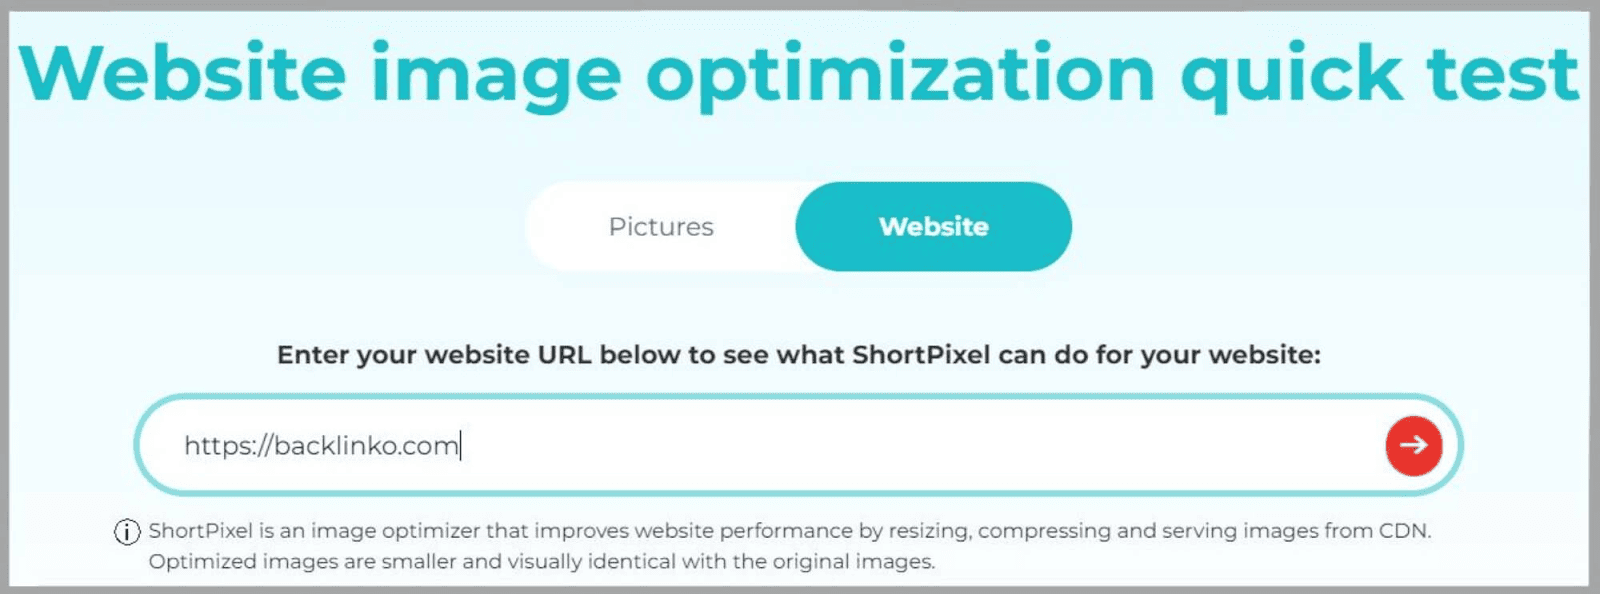 Carry out an image optimization test using ShortPixel